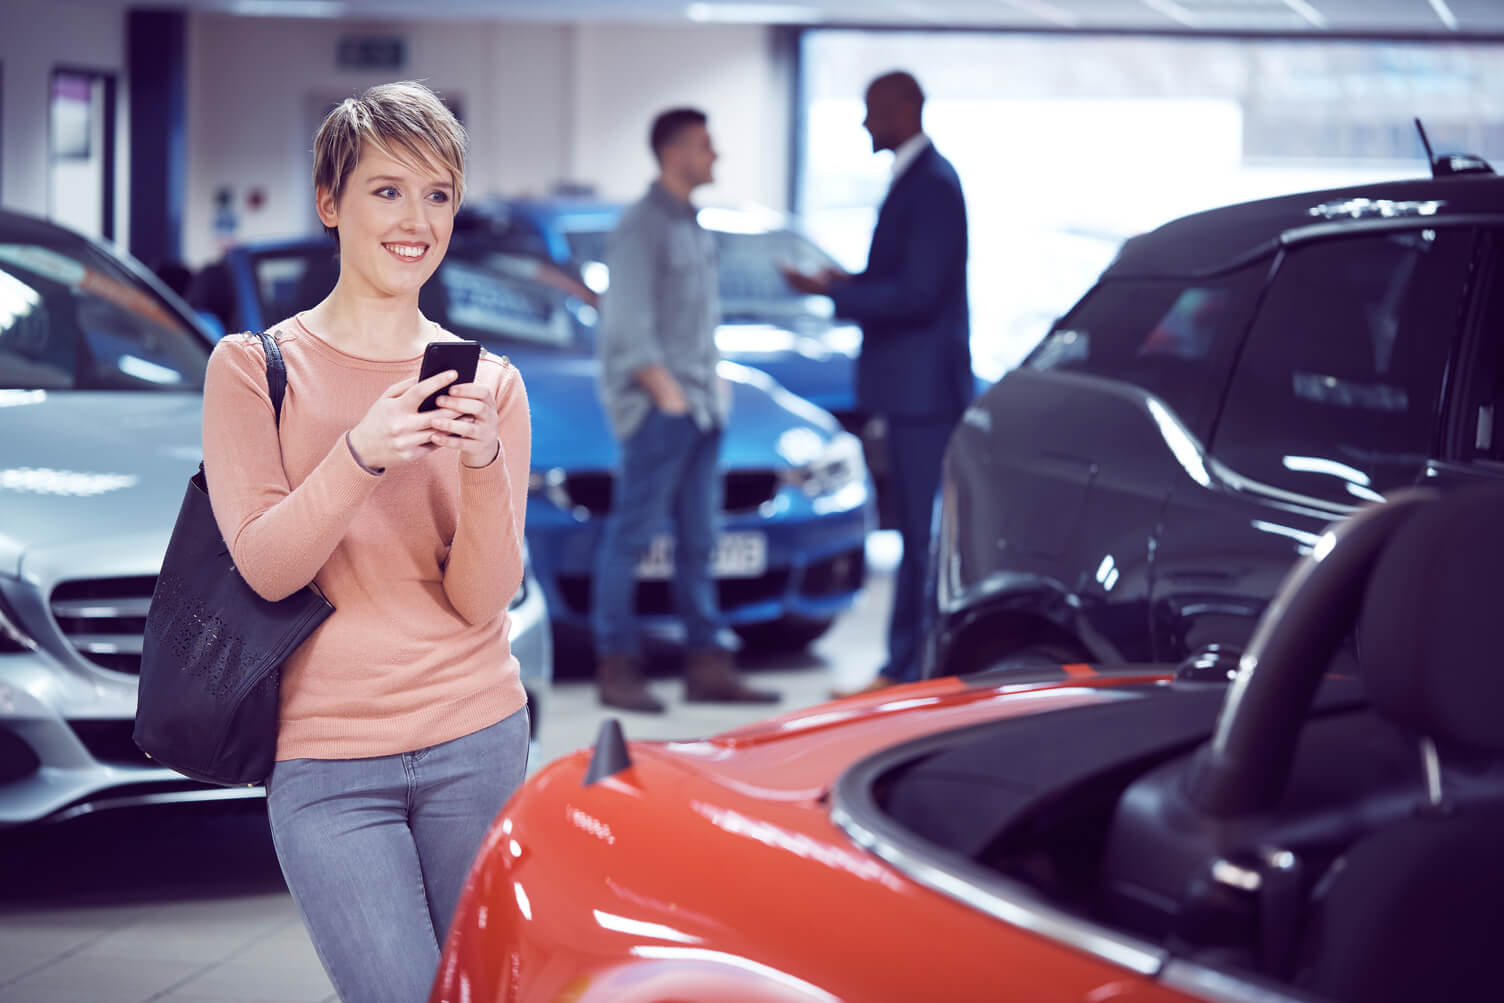 Woman smiling while in a dealership showroom.